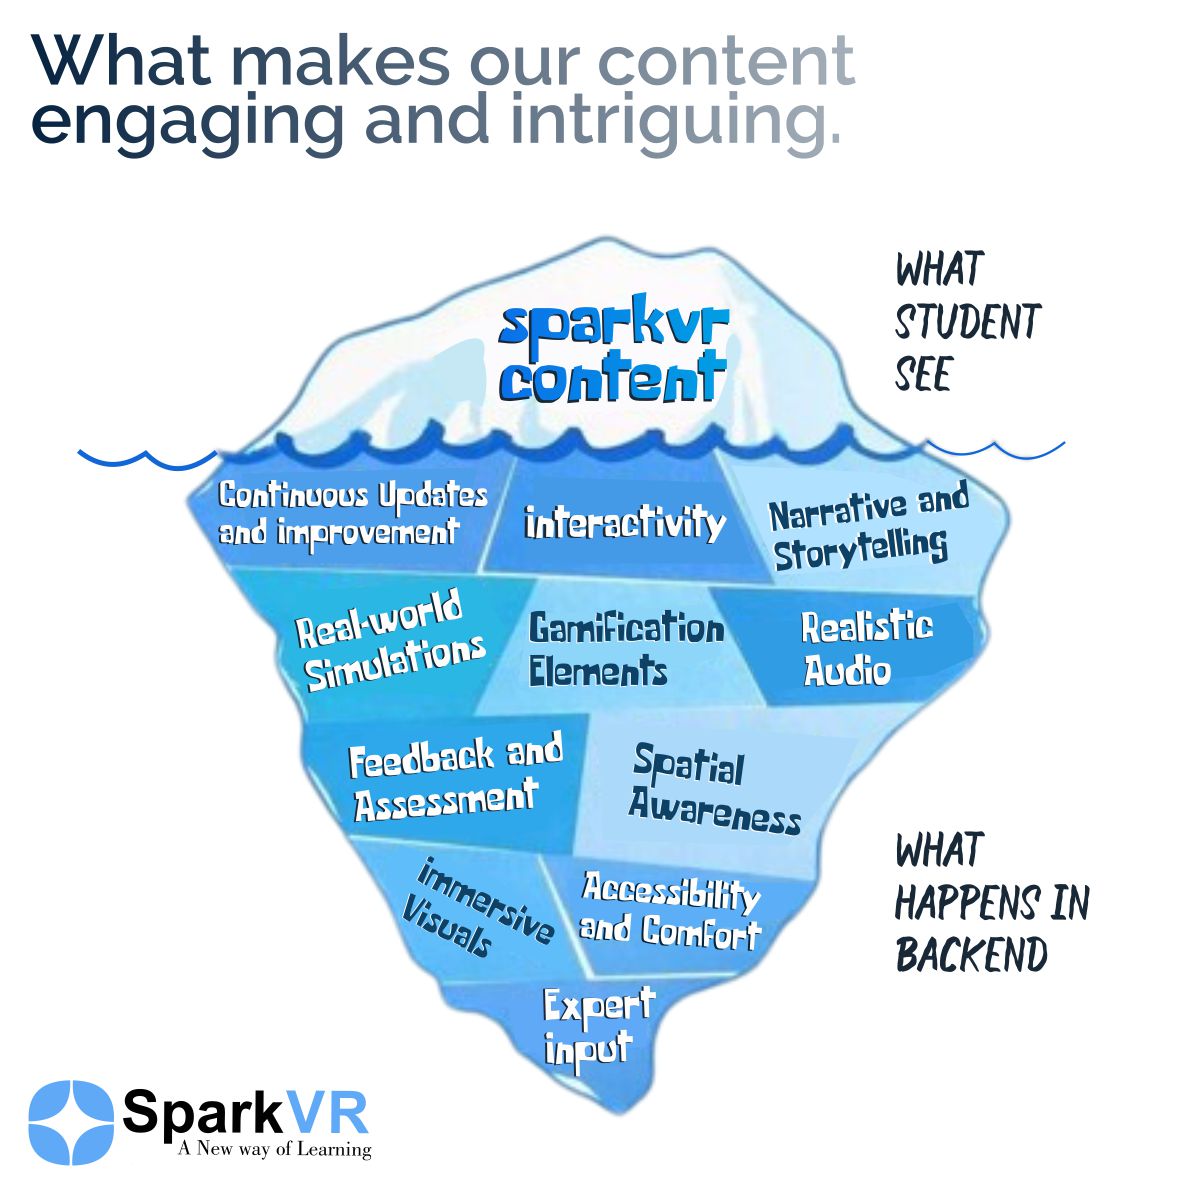 Why the SparkVR content is captivating?
With our content, you'll experience mind-blowing visuals and realistic audio that will transport you to another dimension. 
 
#immersivecontent #sparkvr #science #studywithfun #study